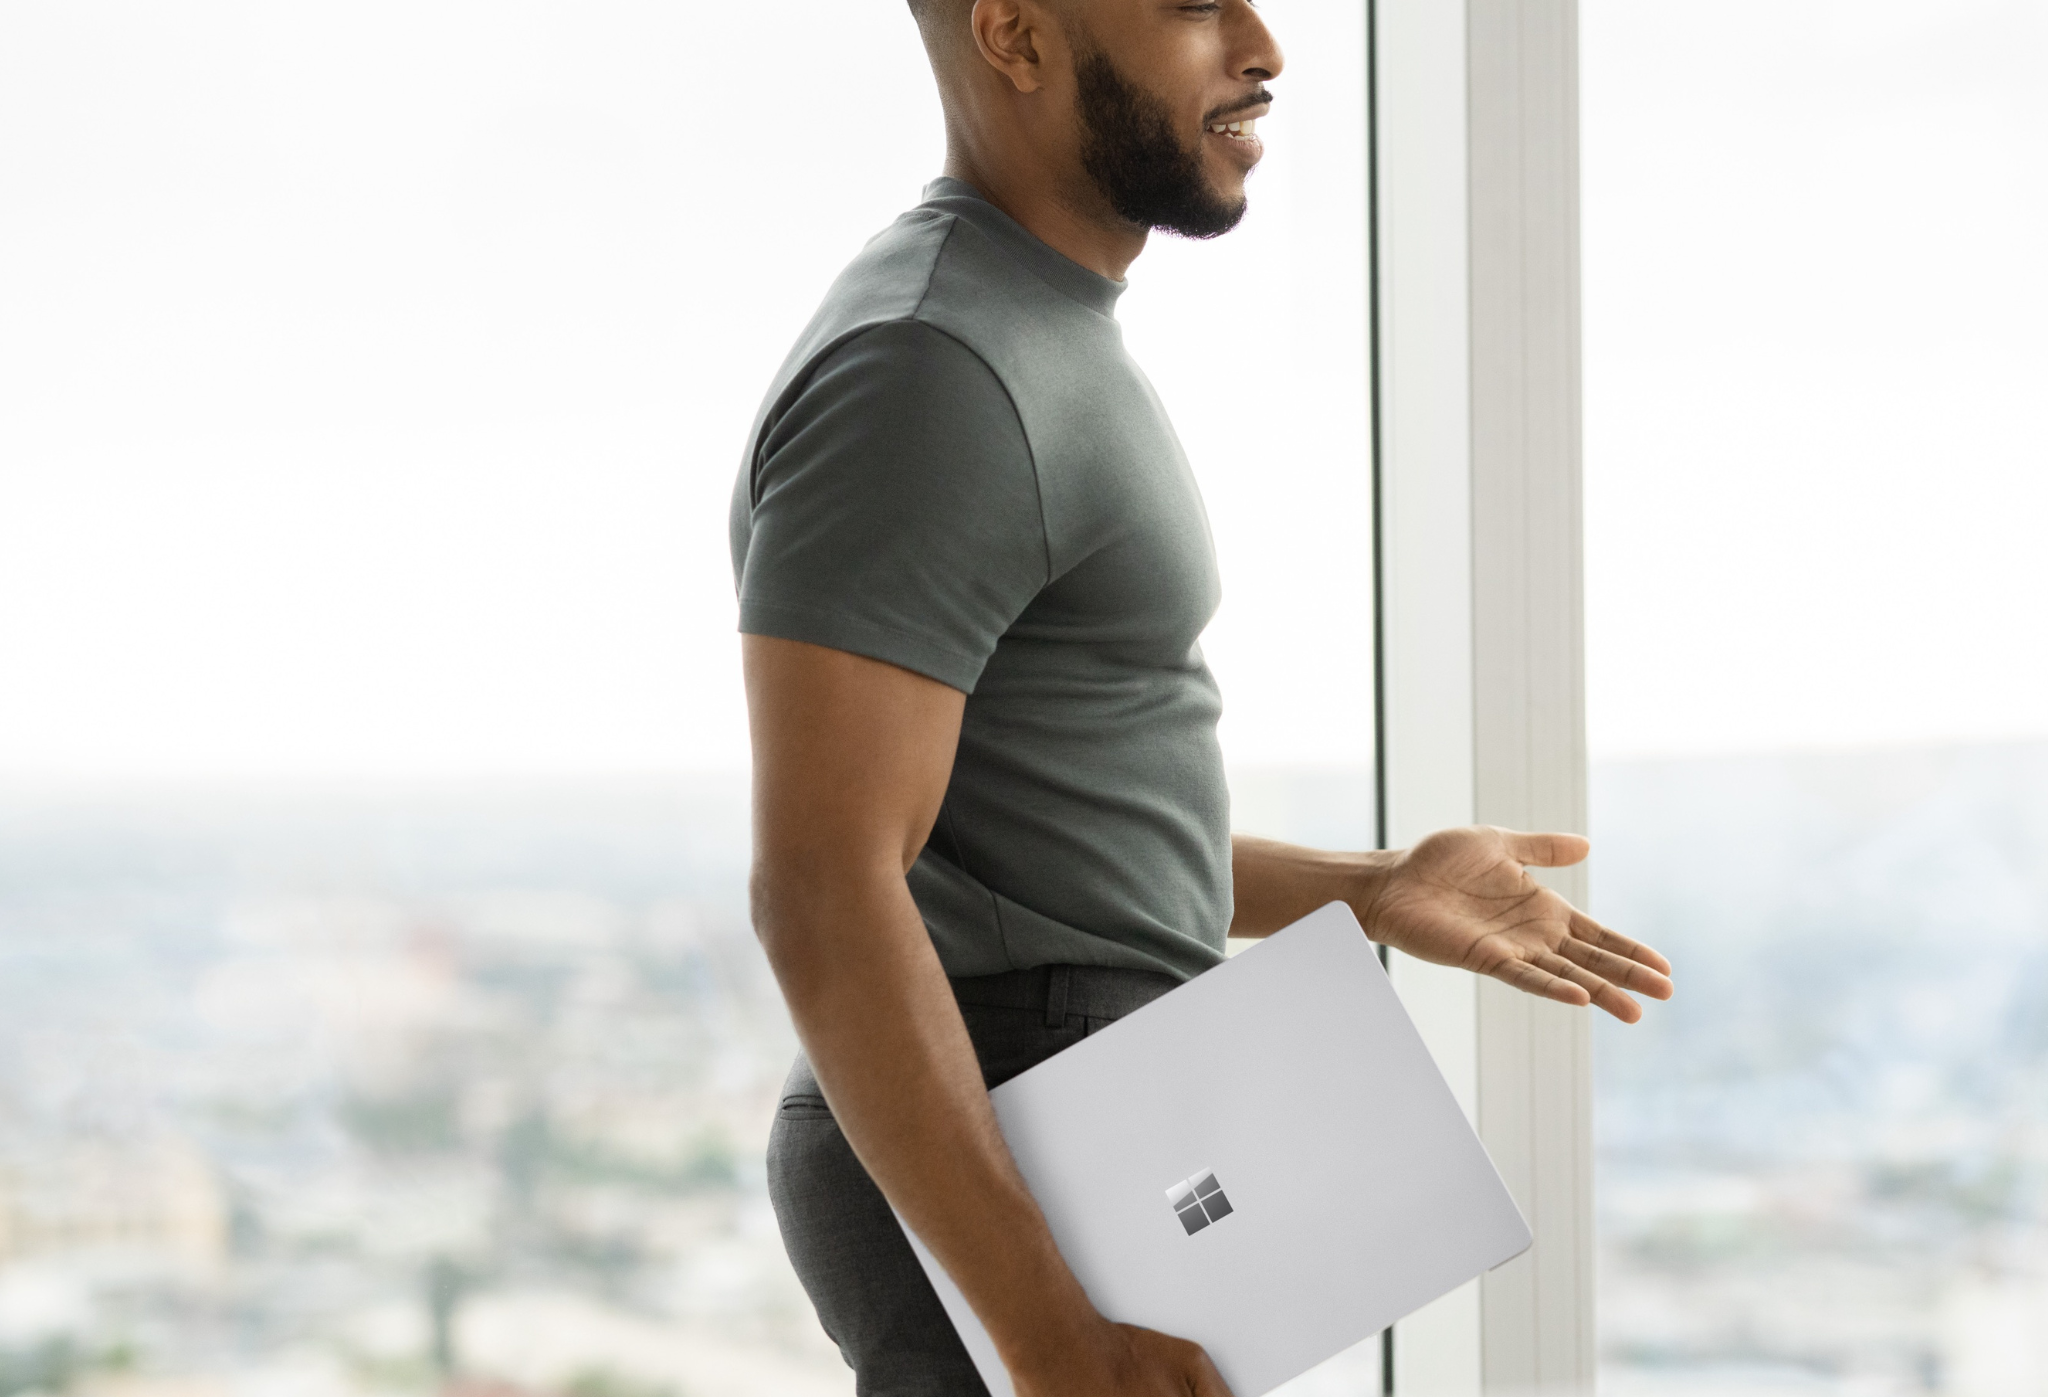 Happy man holding a portable Surface device